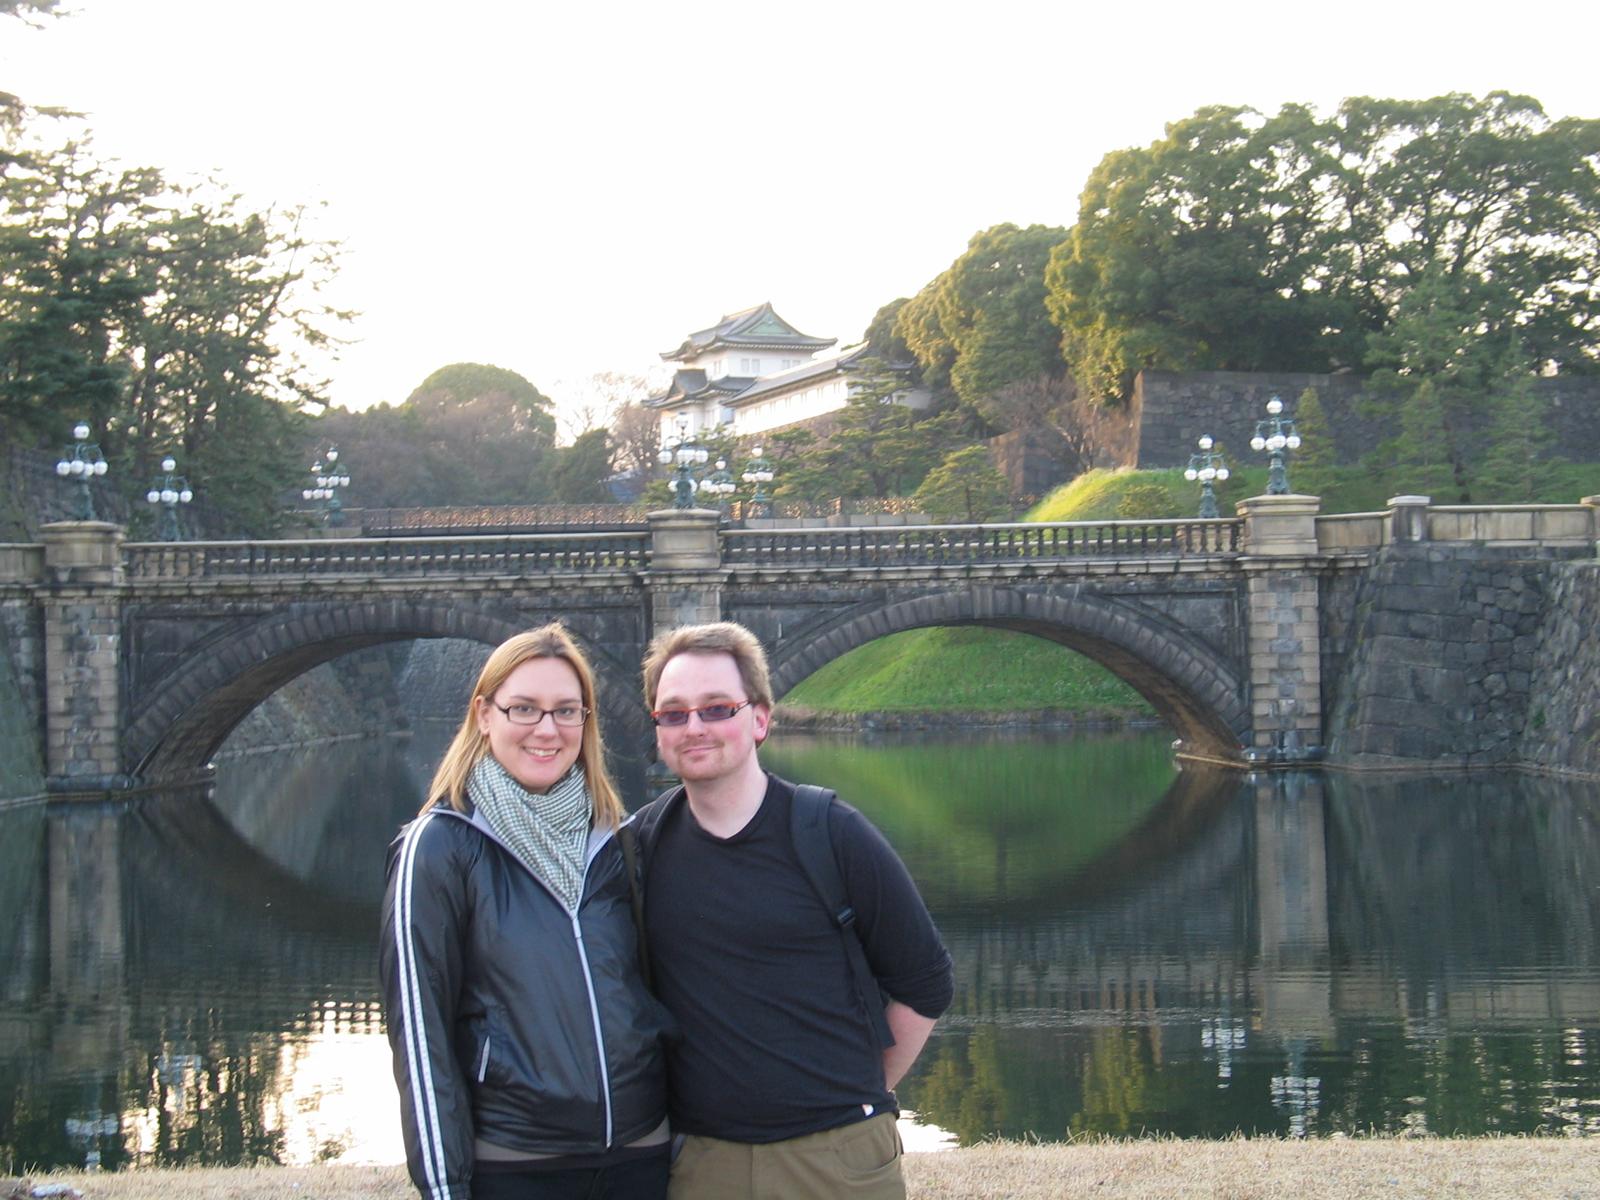 Susan and me at the Imperial Palace